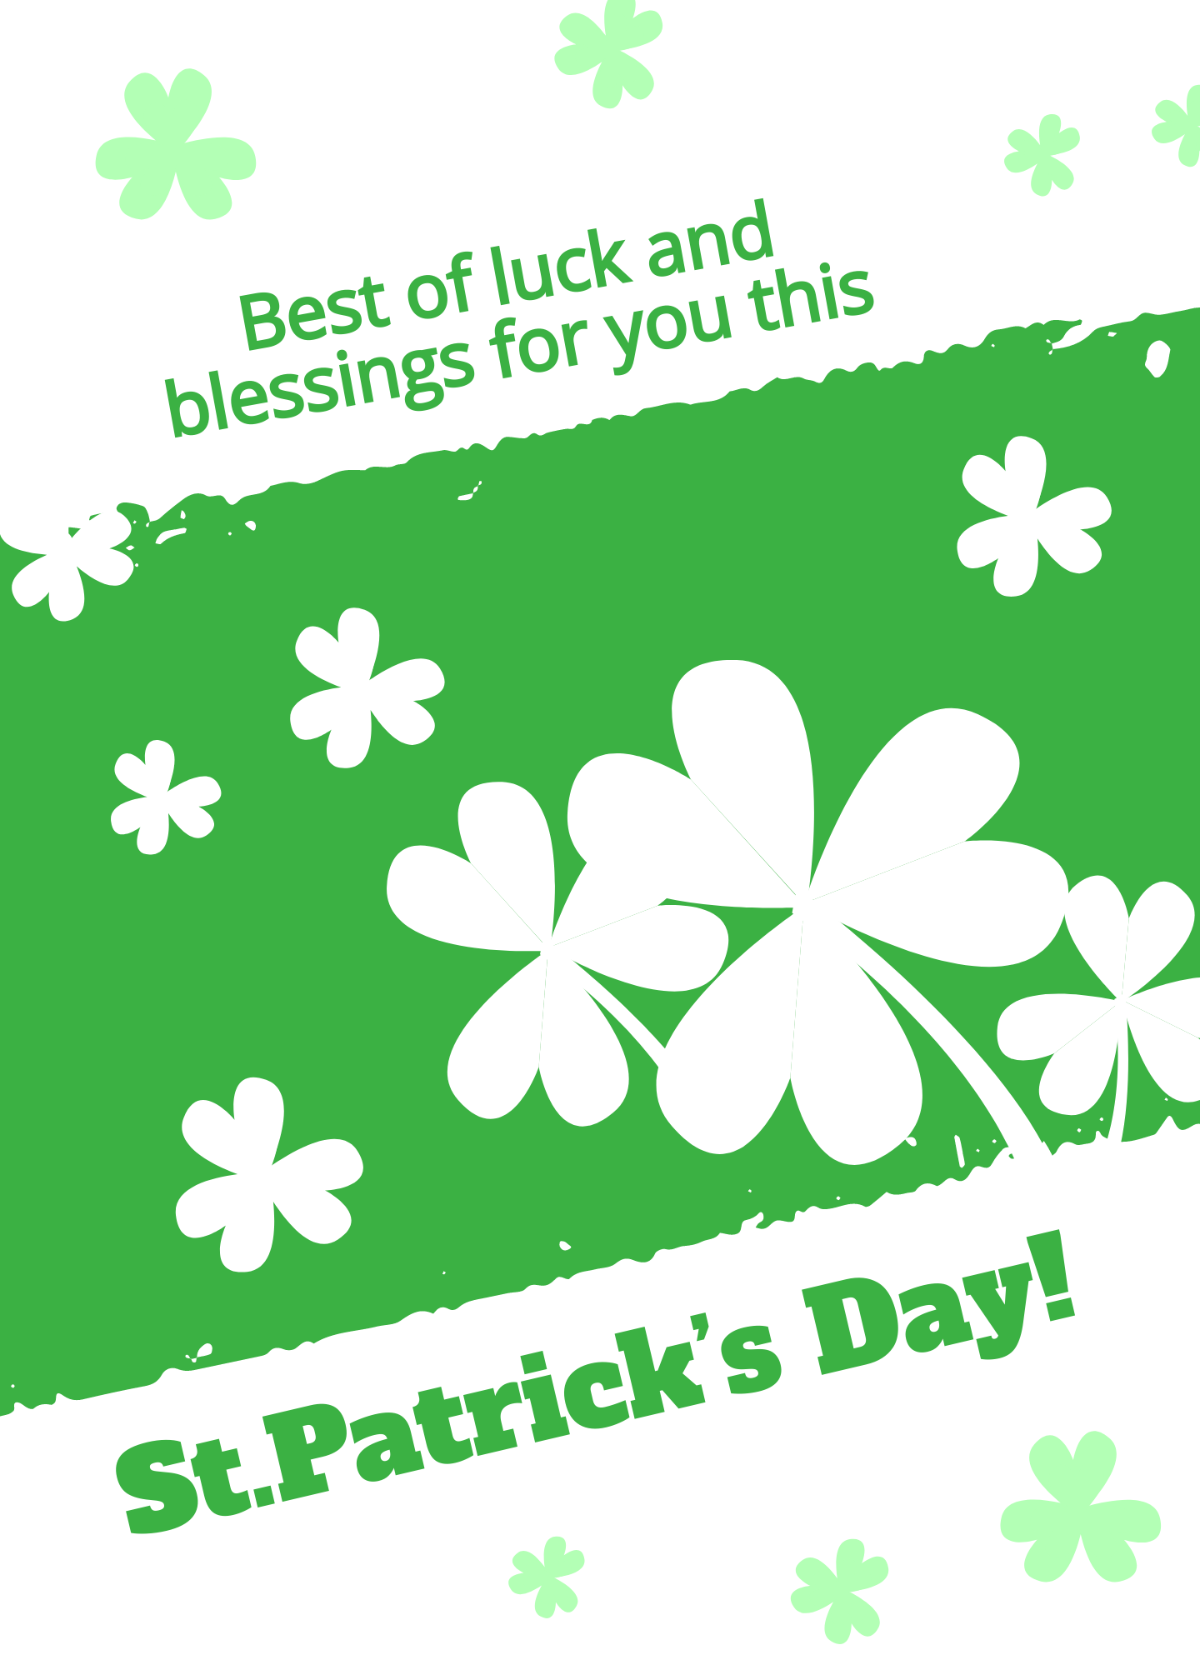 St. Patrick's Day Best Wishes Template